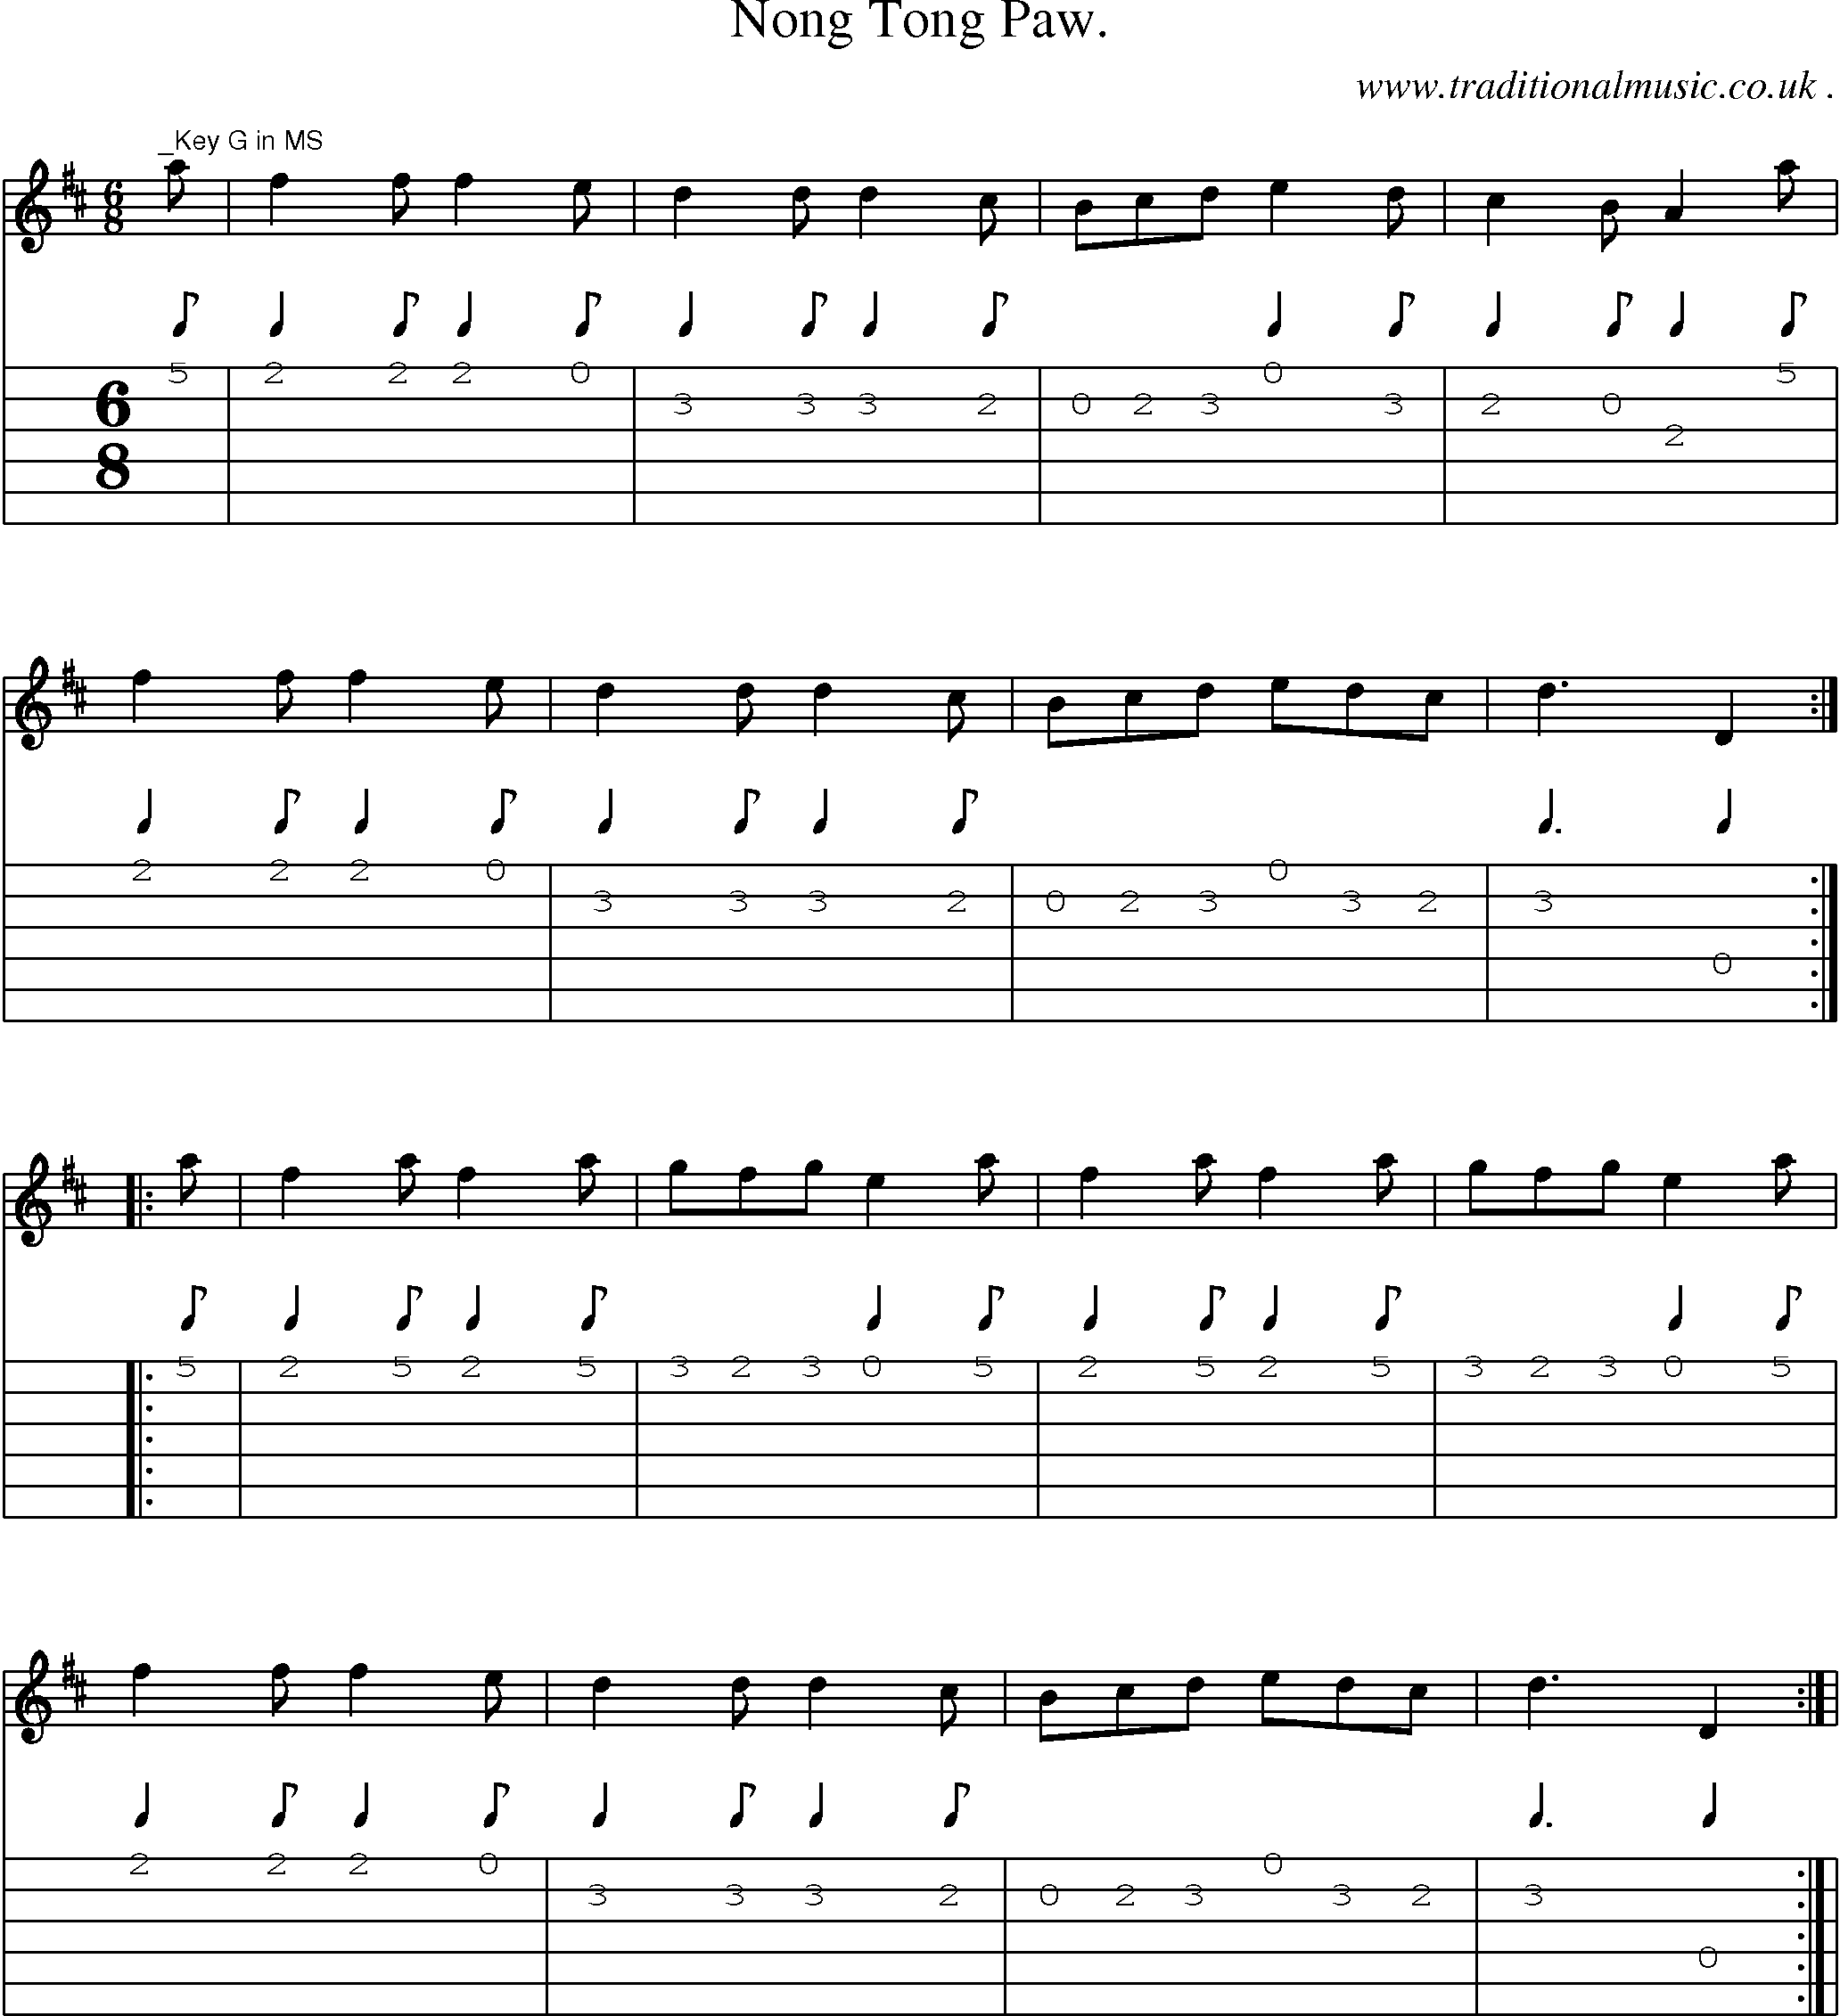 Sheet-Music and Guitar Tabs for Nong Tong Paw